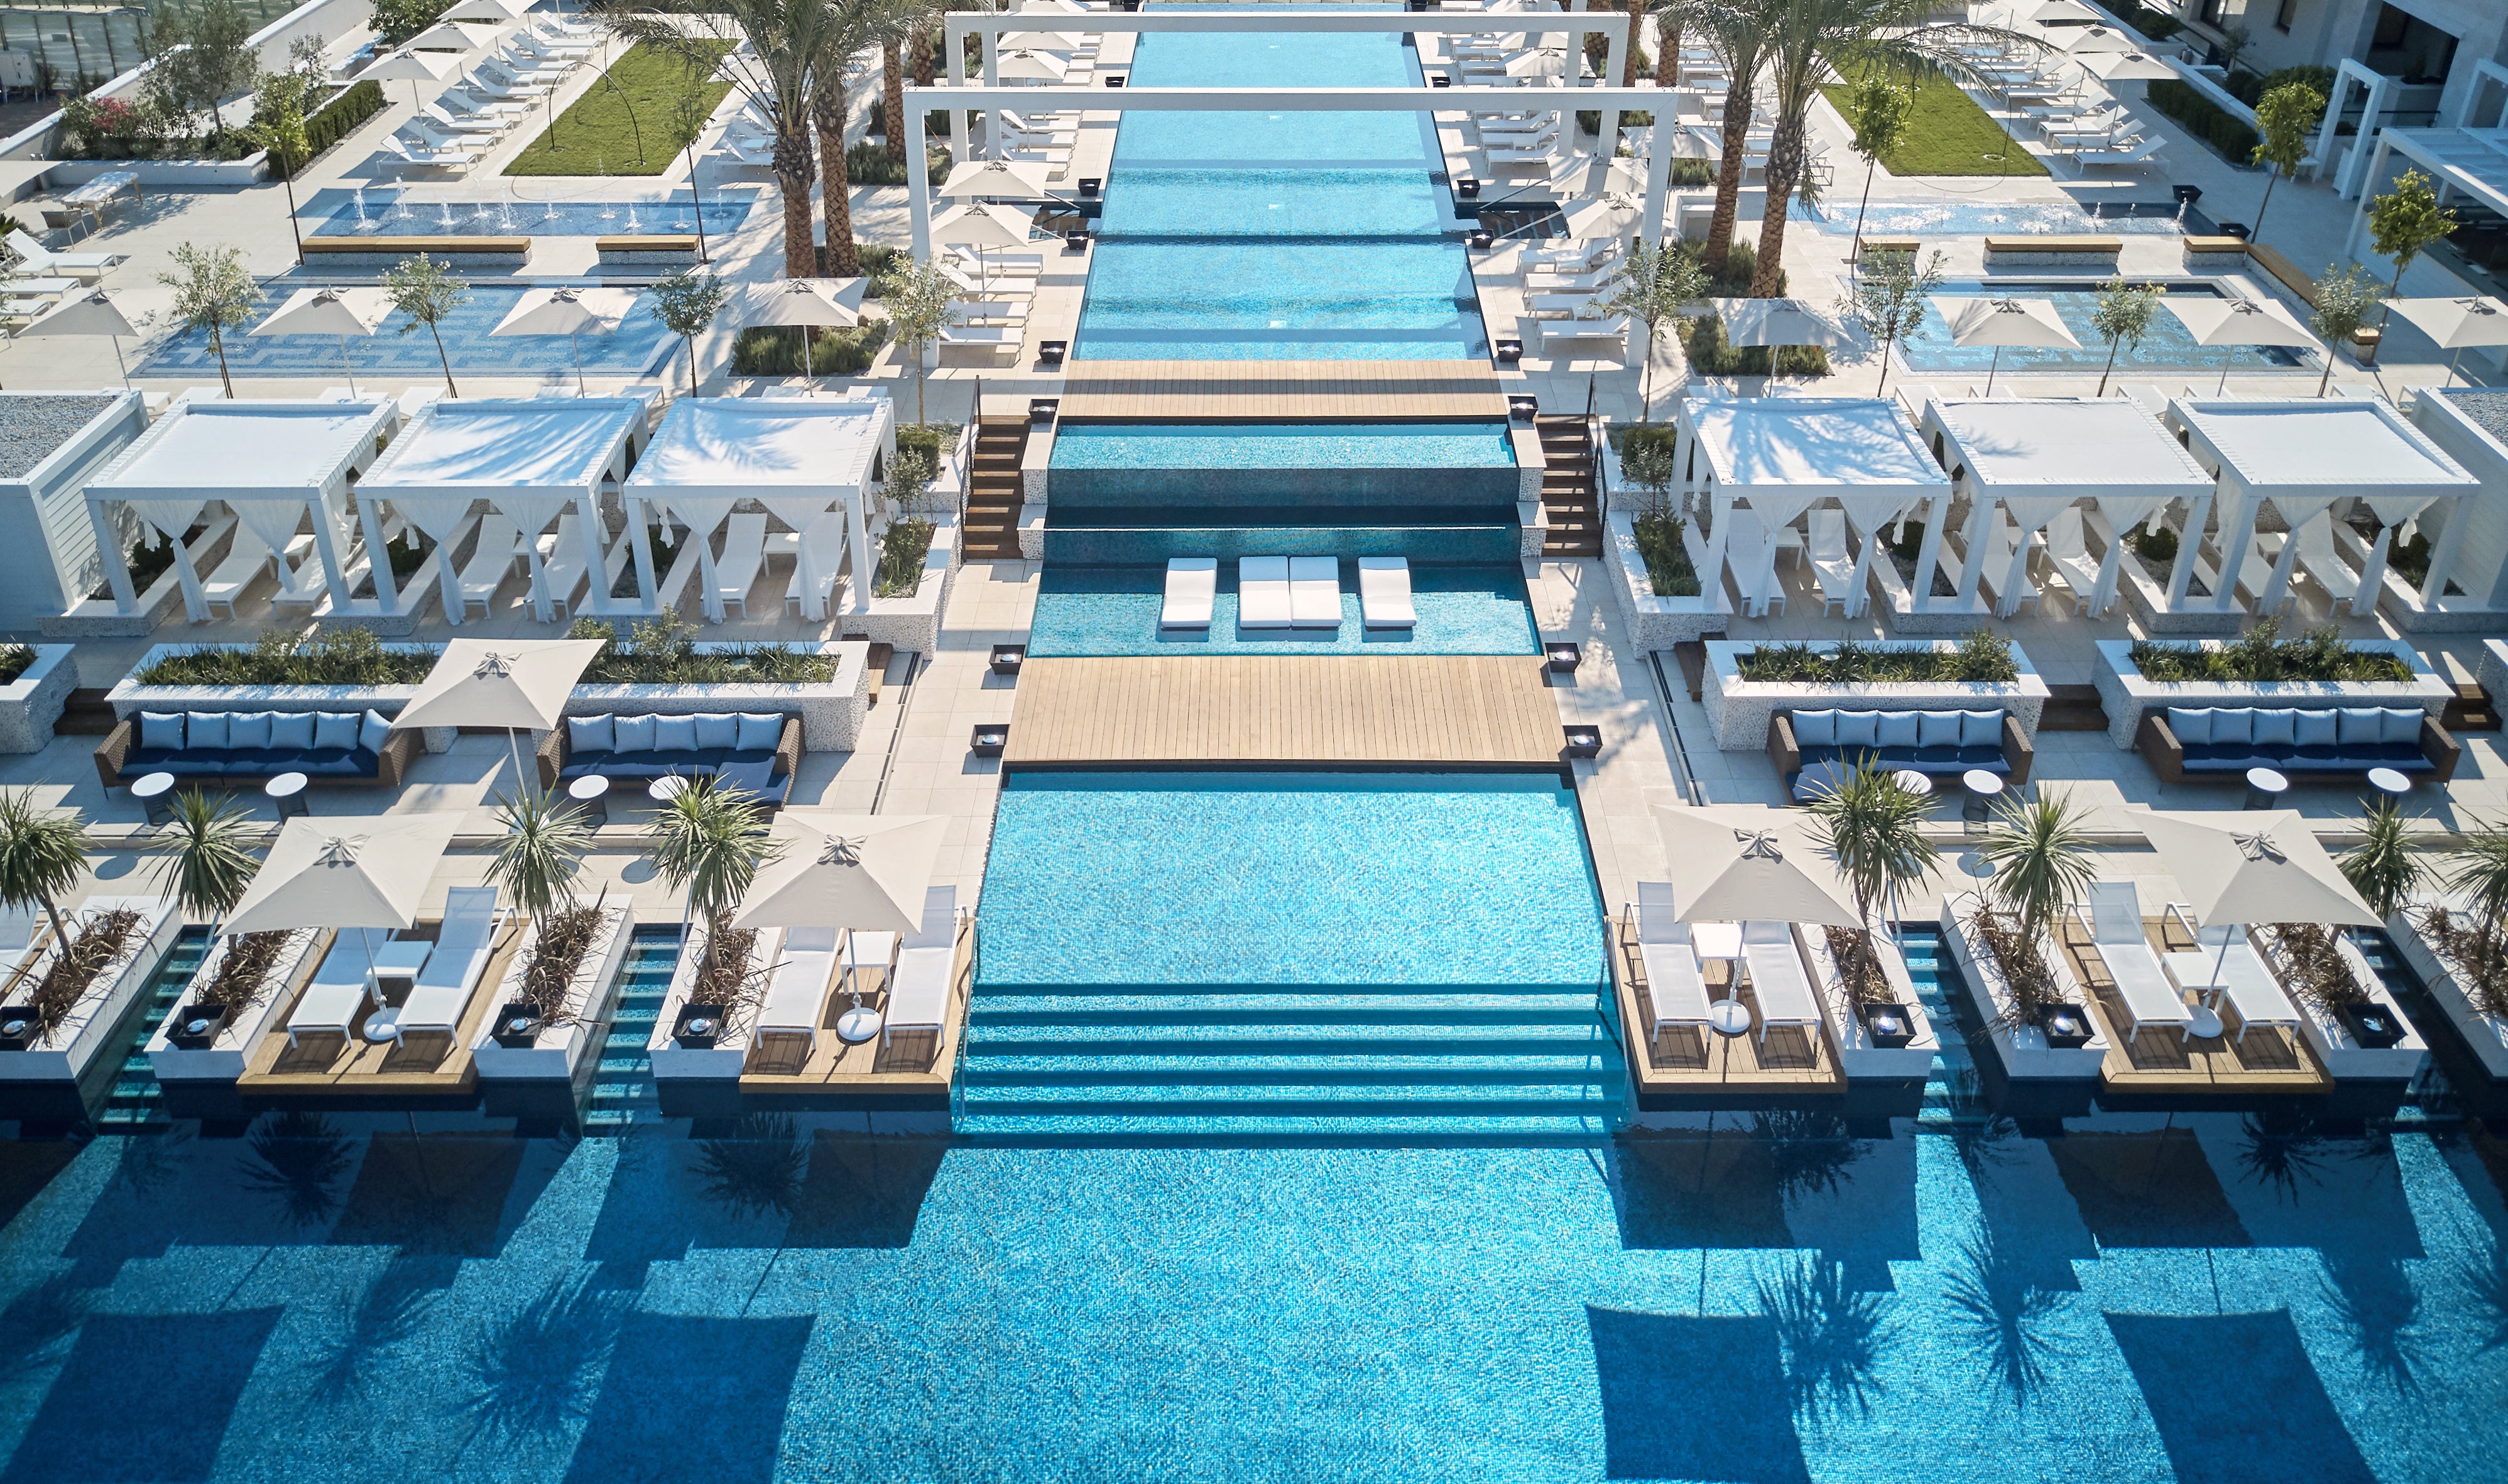 Enjoy a luxe break at a breathtaking hotel with BA Holidays